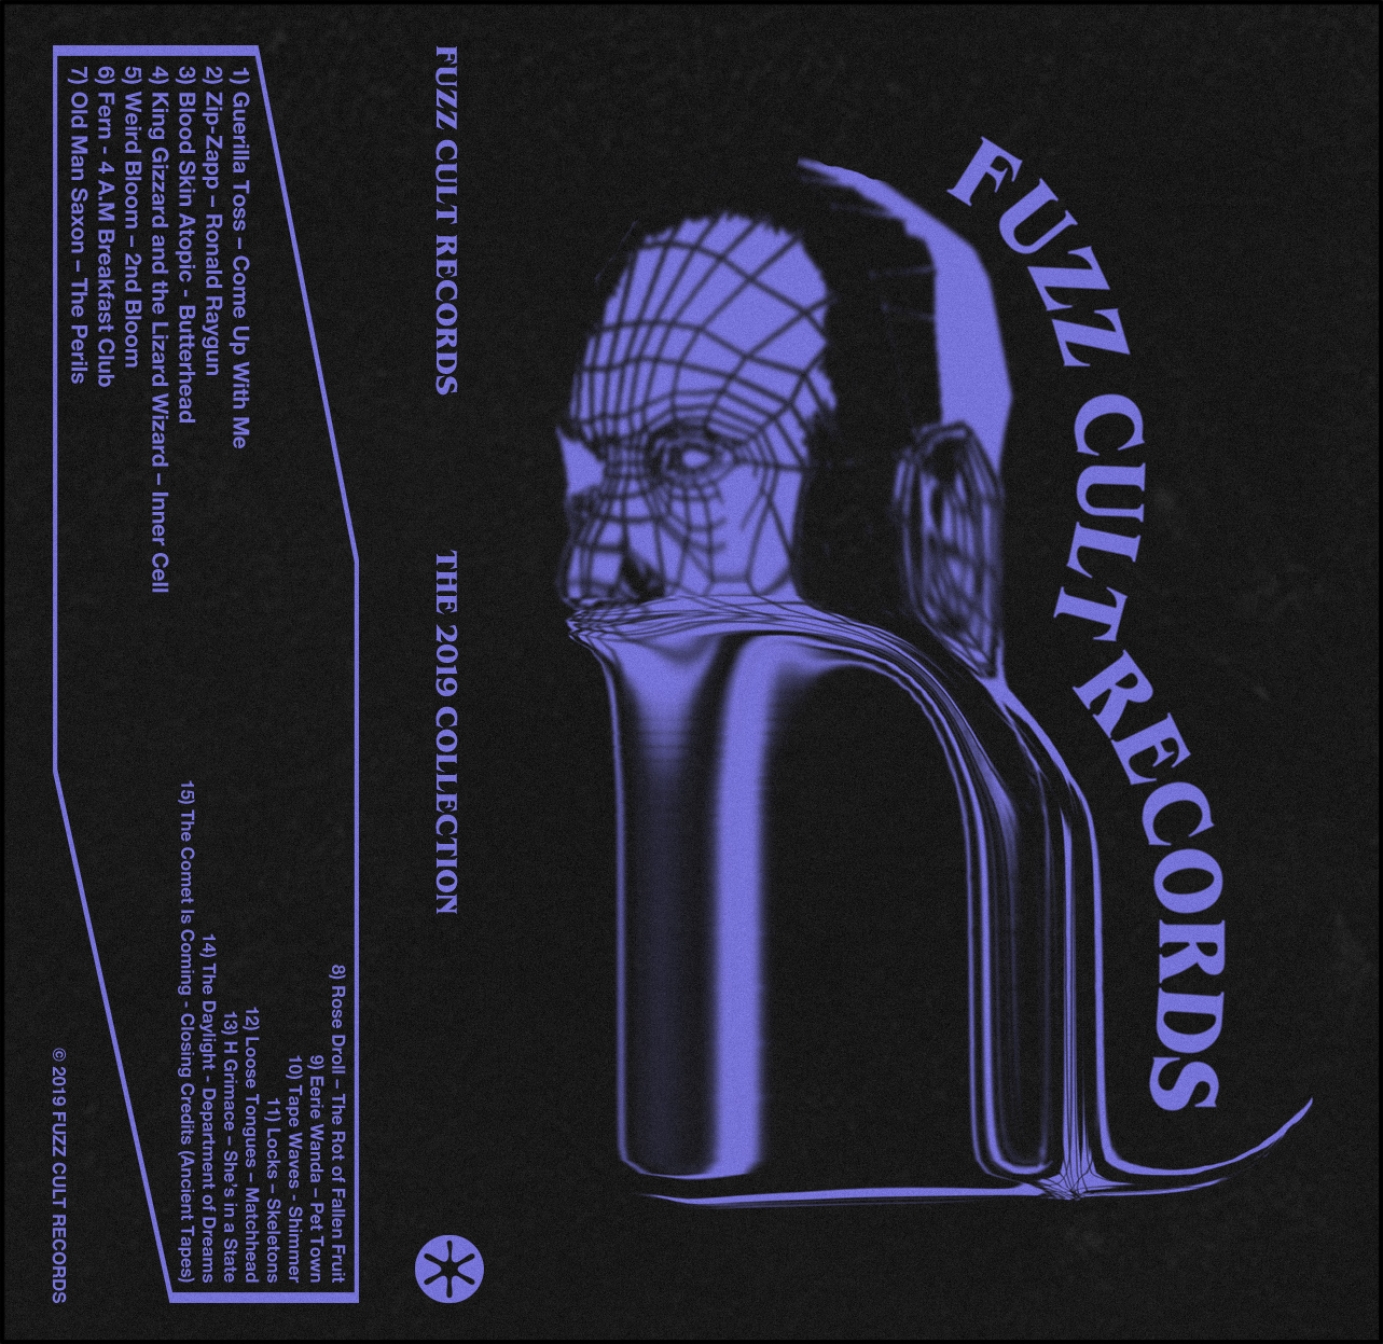 FUZZ CULT RECORDS - "2019 COLLECTION" CASSETTE